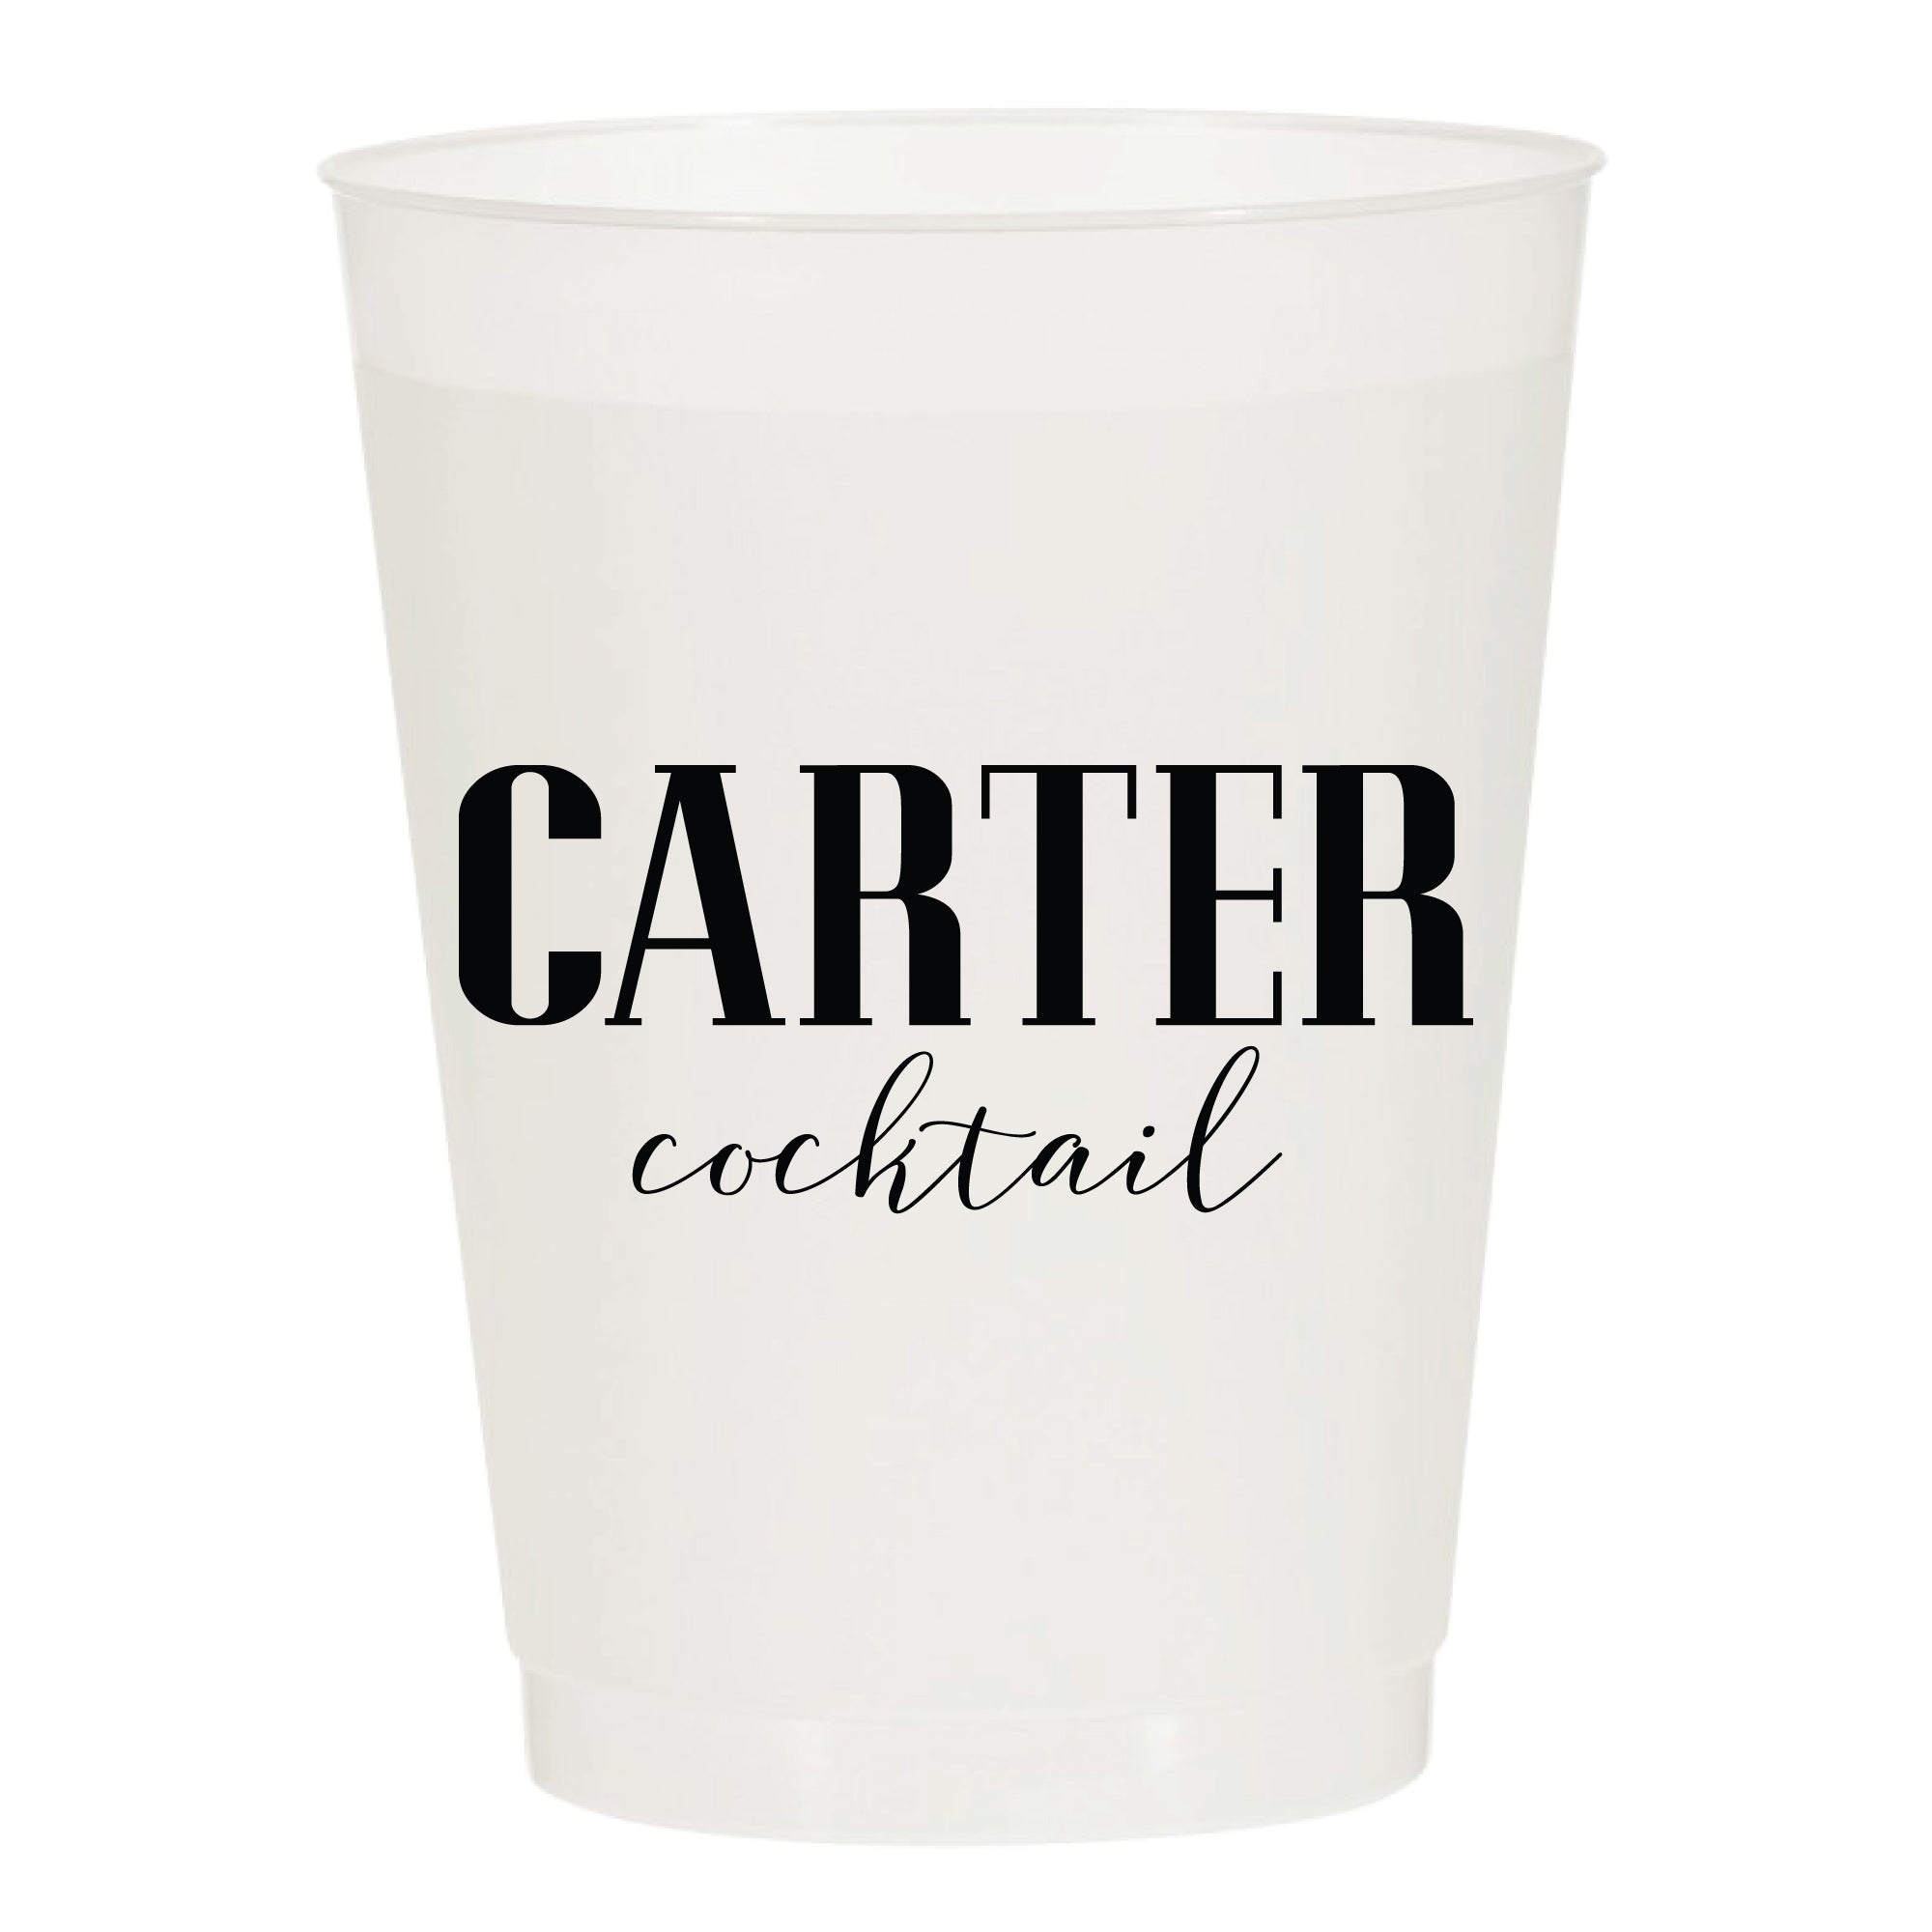  Sip Sip Hooray Personalized Name Glass Cup with Black